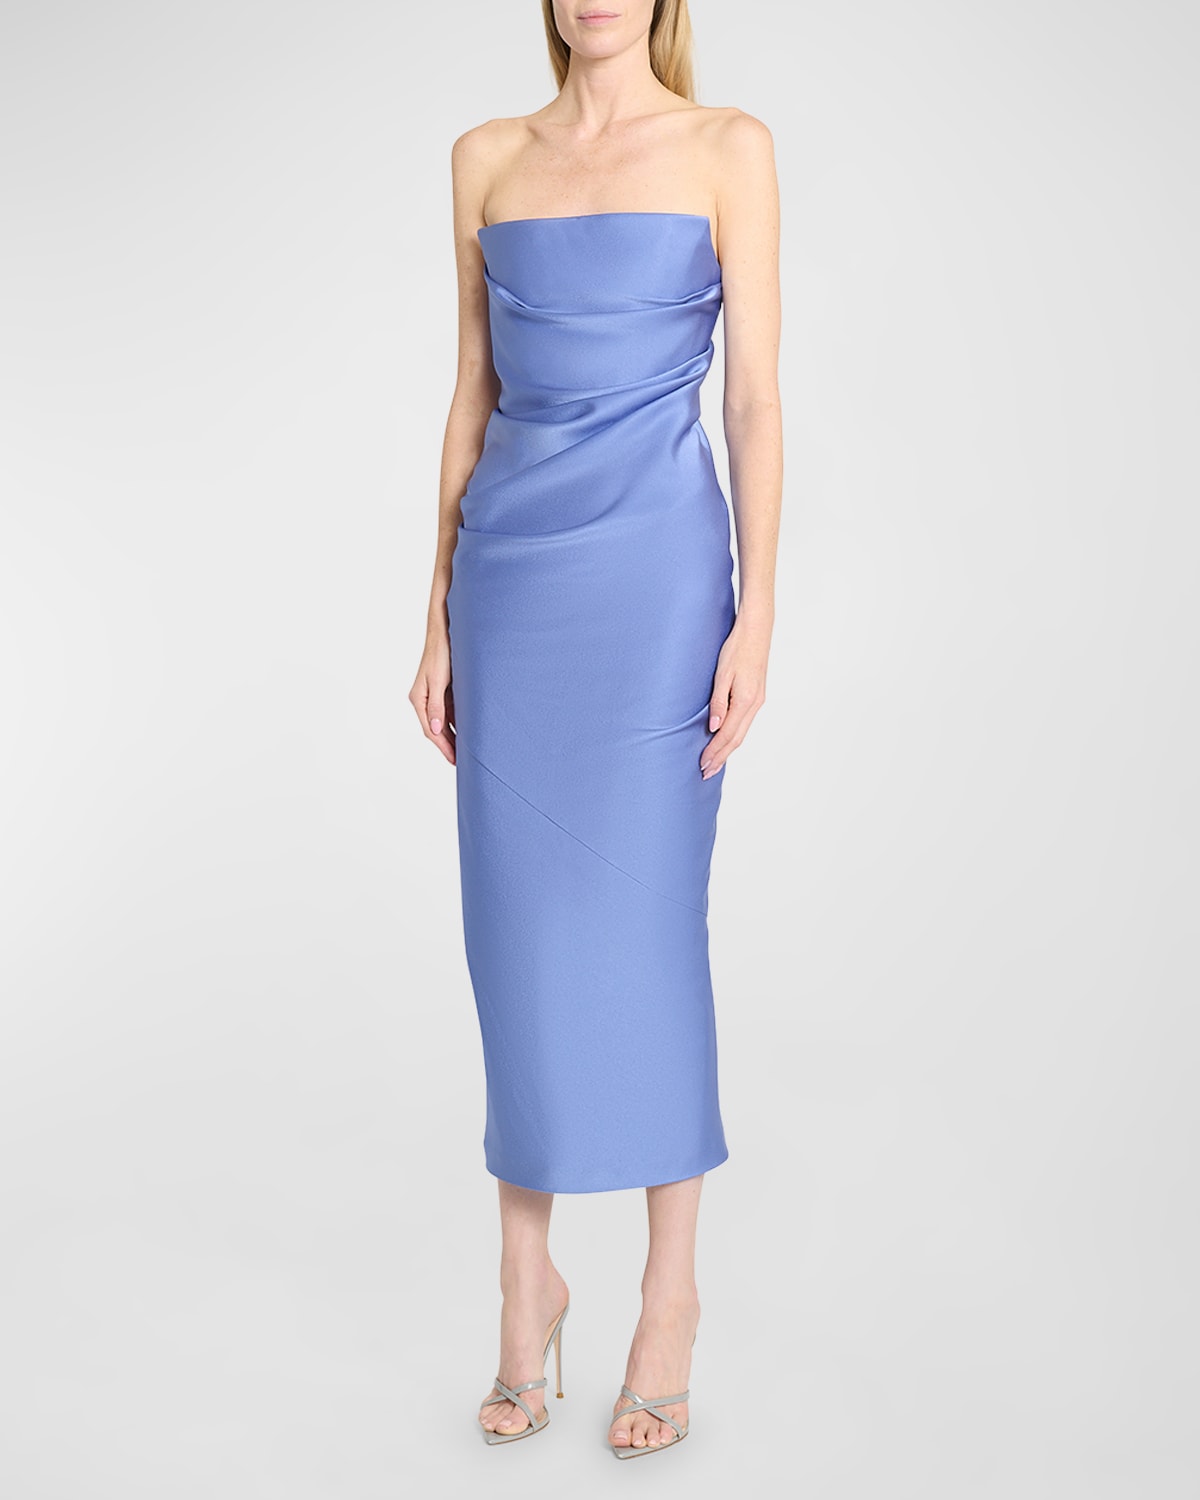 Shop Alex Perry Satin Crepe Strapless Draped Midi Dress In Periwinkle